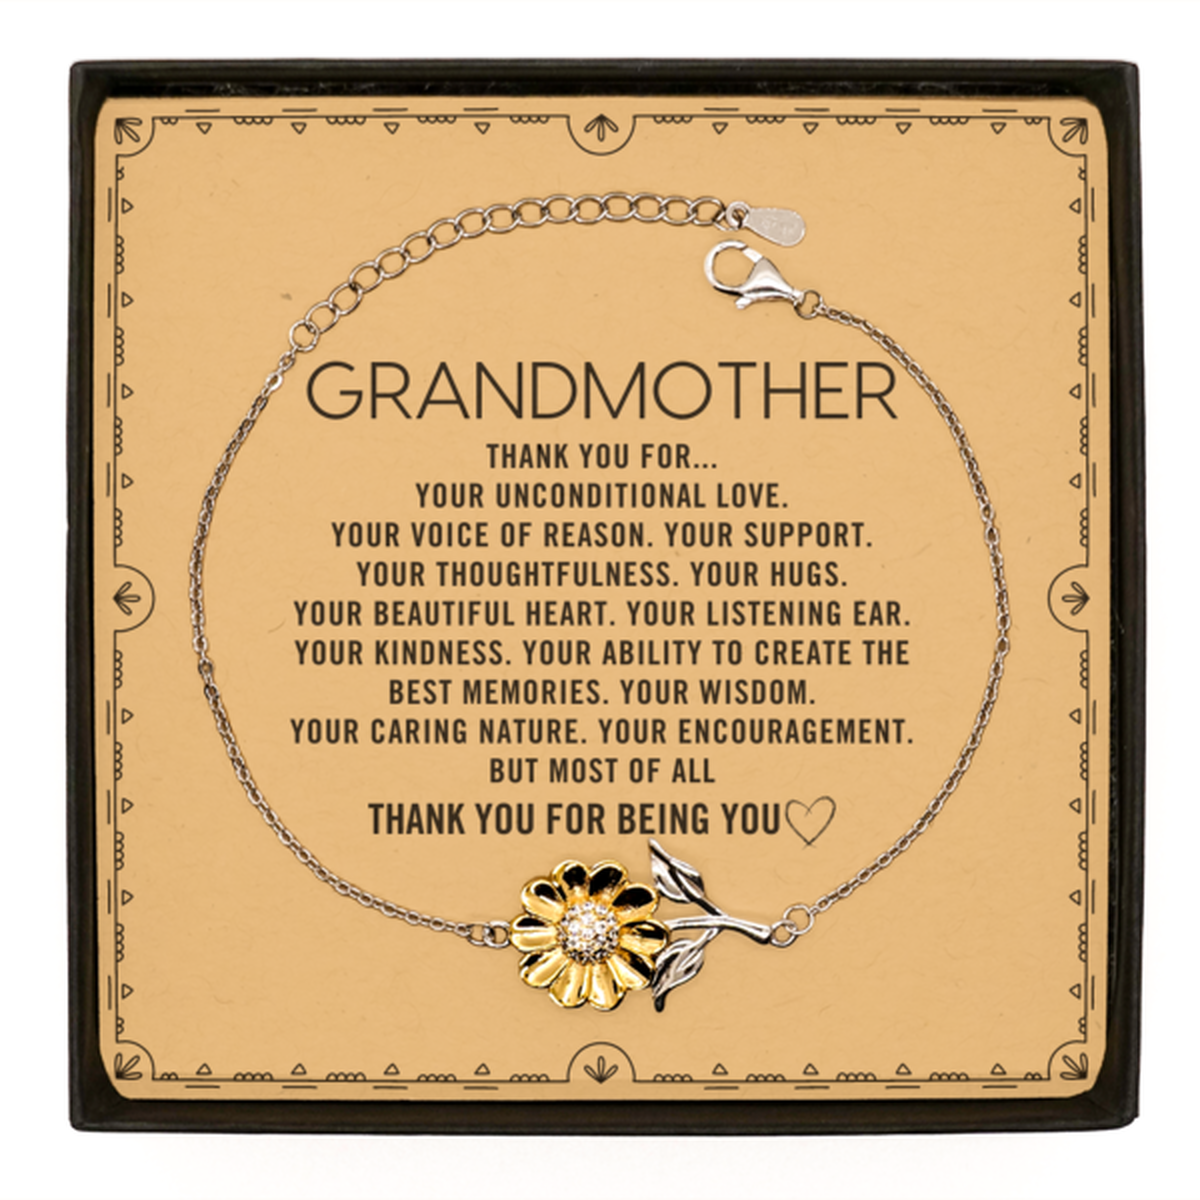 Grandmother Sunflower Bracelet Custom, Message Card Gifts For Grandmother Christmas Graduation Birthday Gifts for Men Women Grandmother Thank you for Your unconditional love